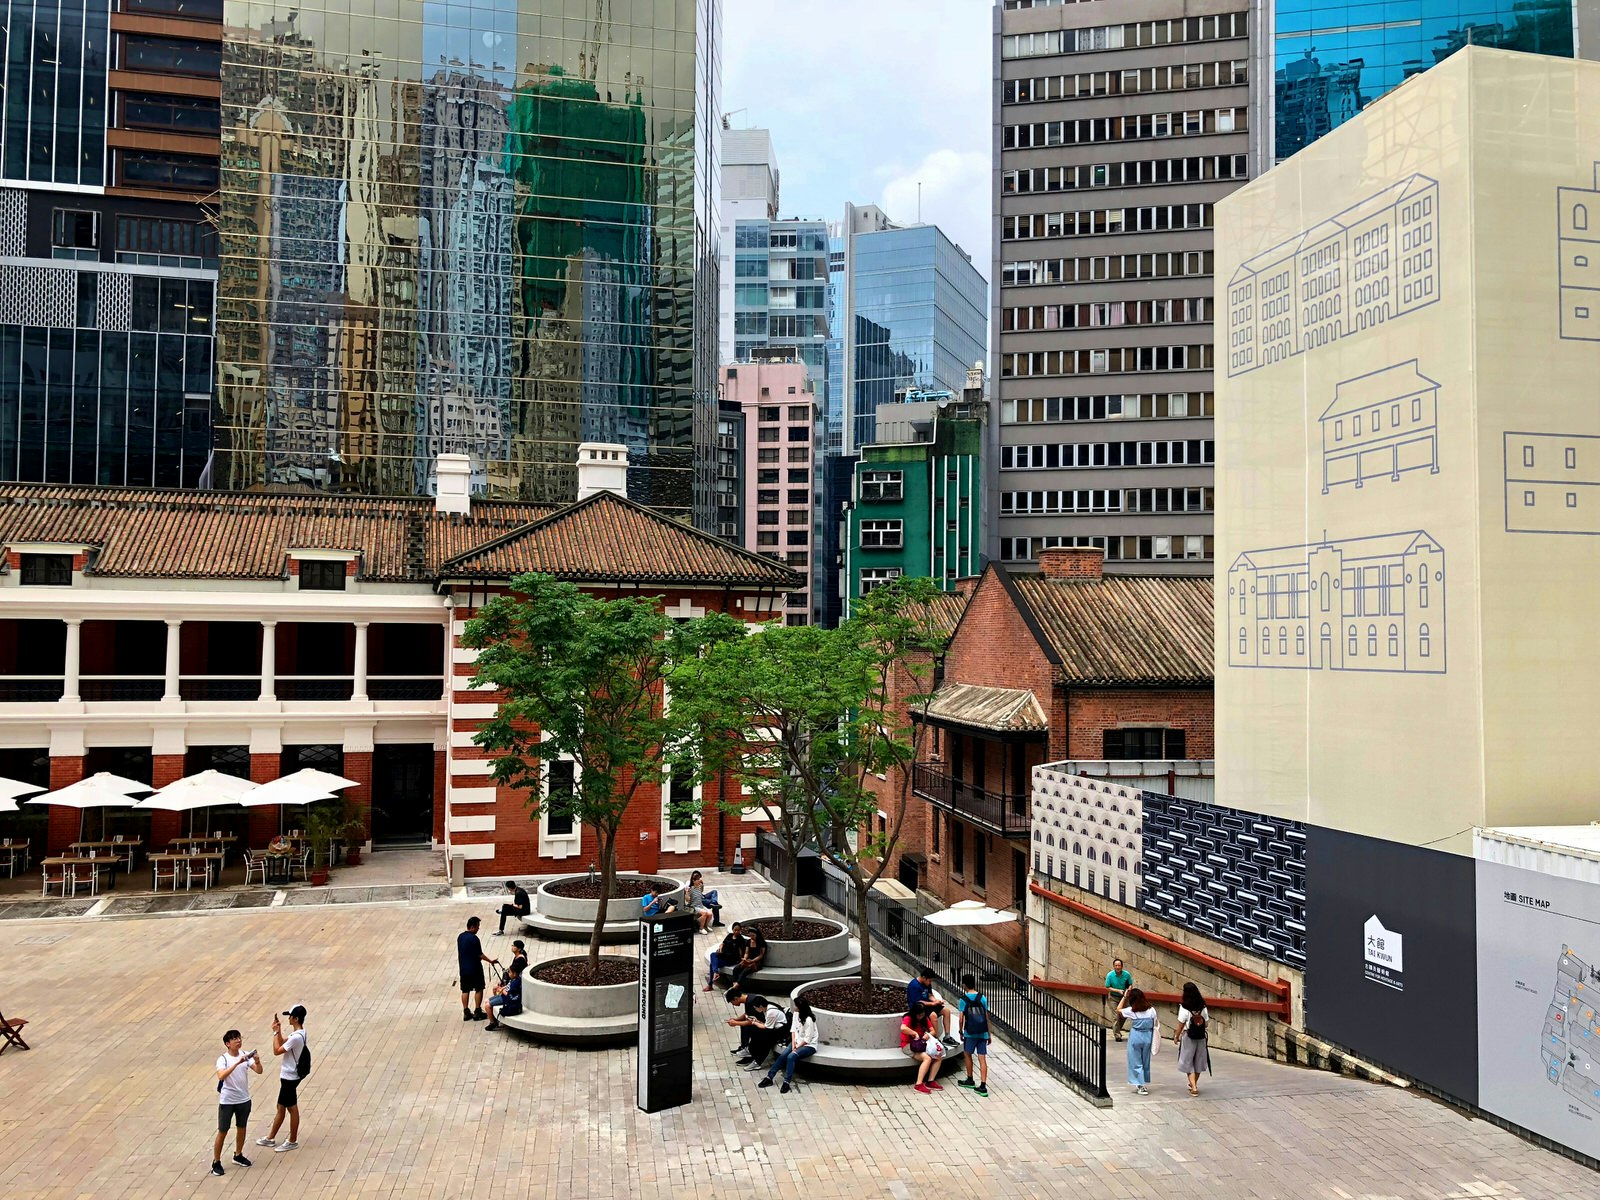 An overview of the inner courtyard of Tai Kwun, with brick buildings surrounded by tall glass skyscrapers